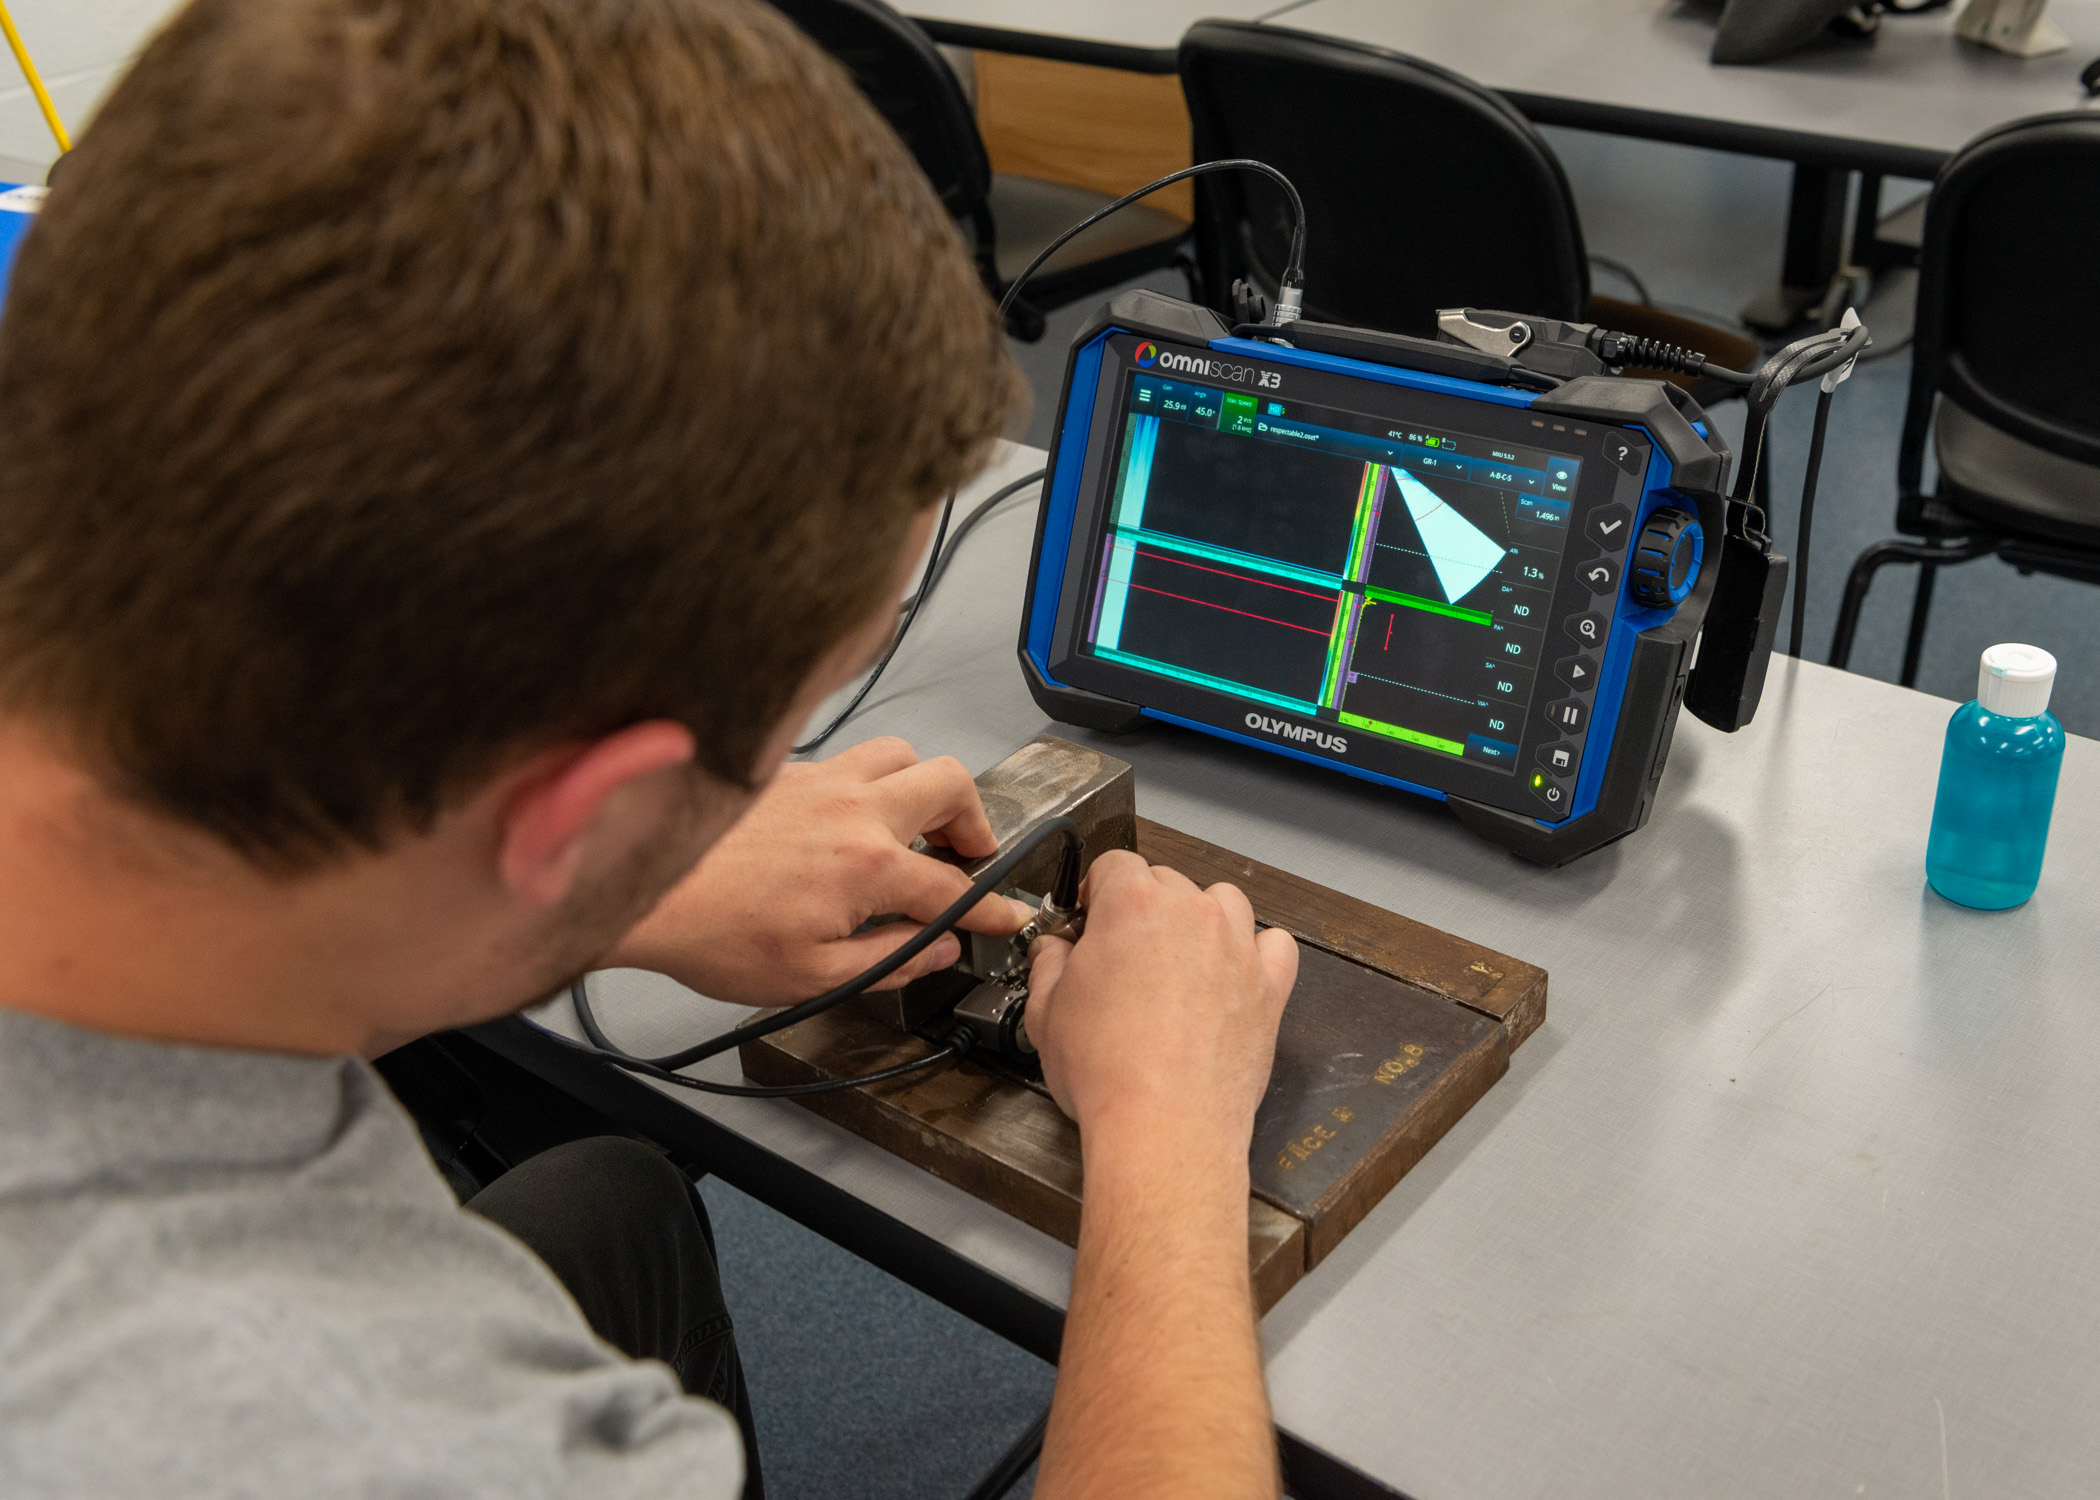 Penn College offers pathways for aspiring NDT inspectors